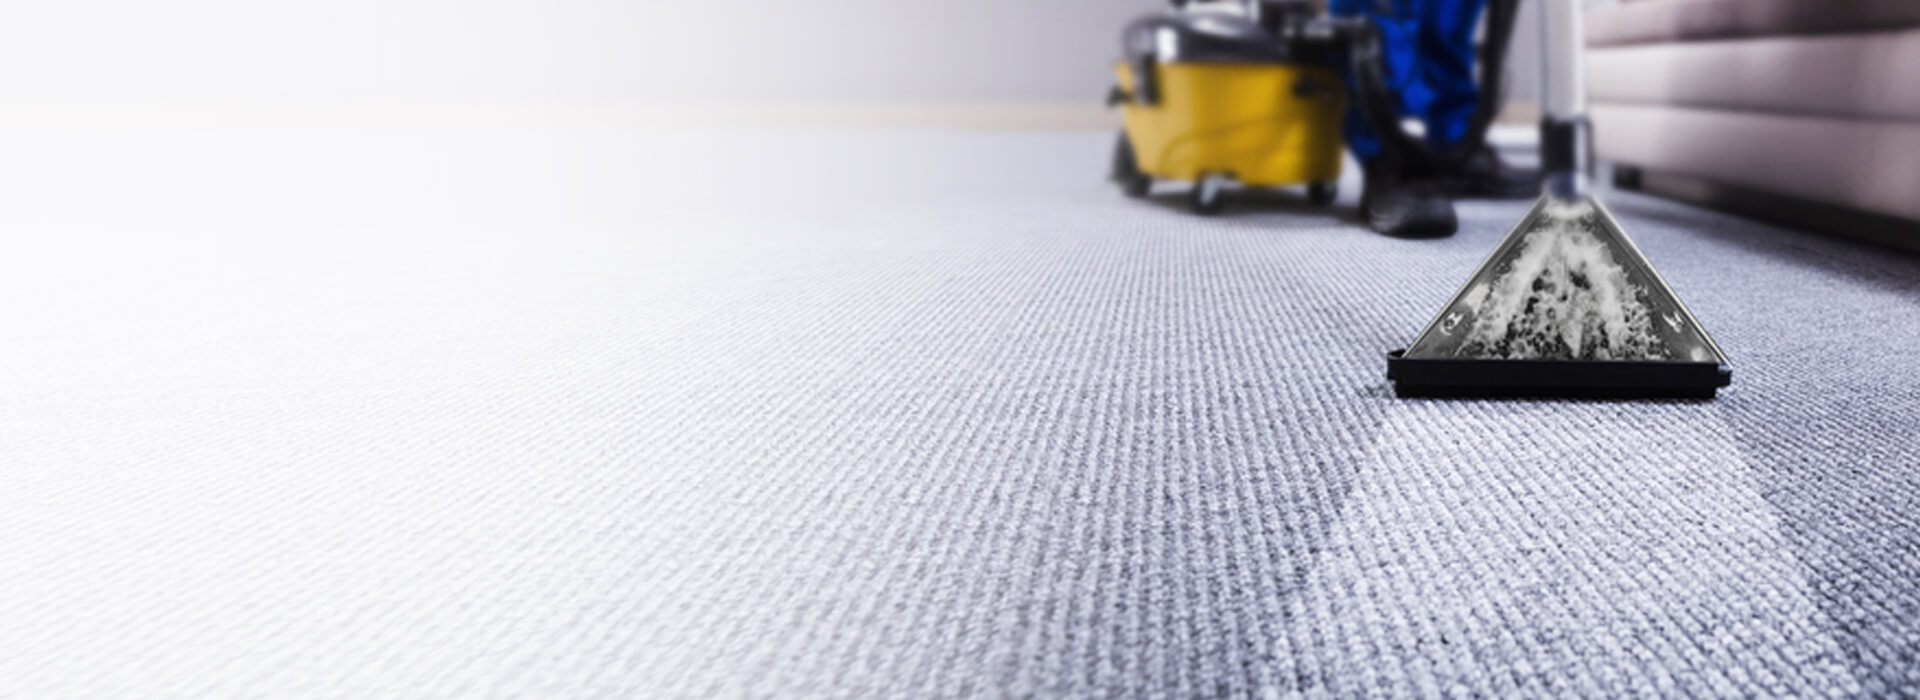 Professional Carpet Cleaning Newcastle